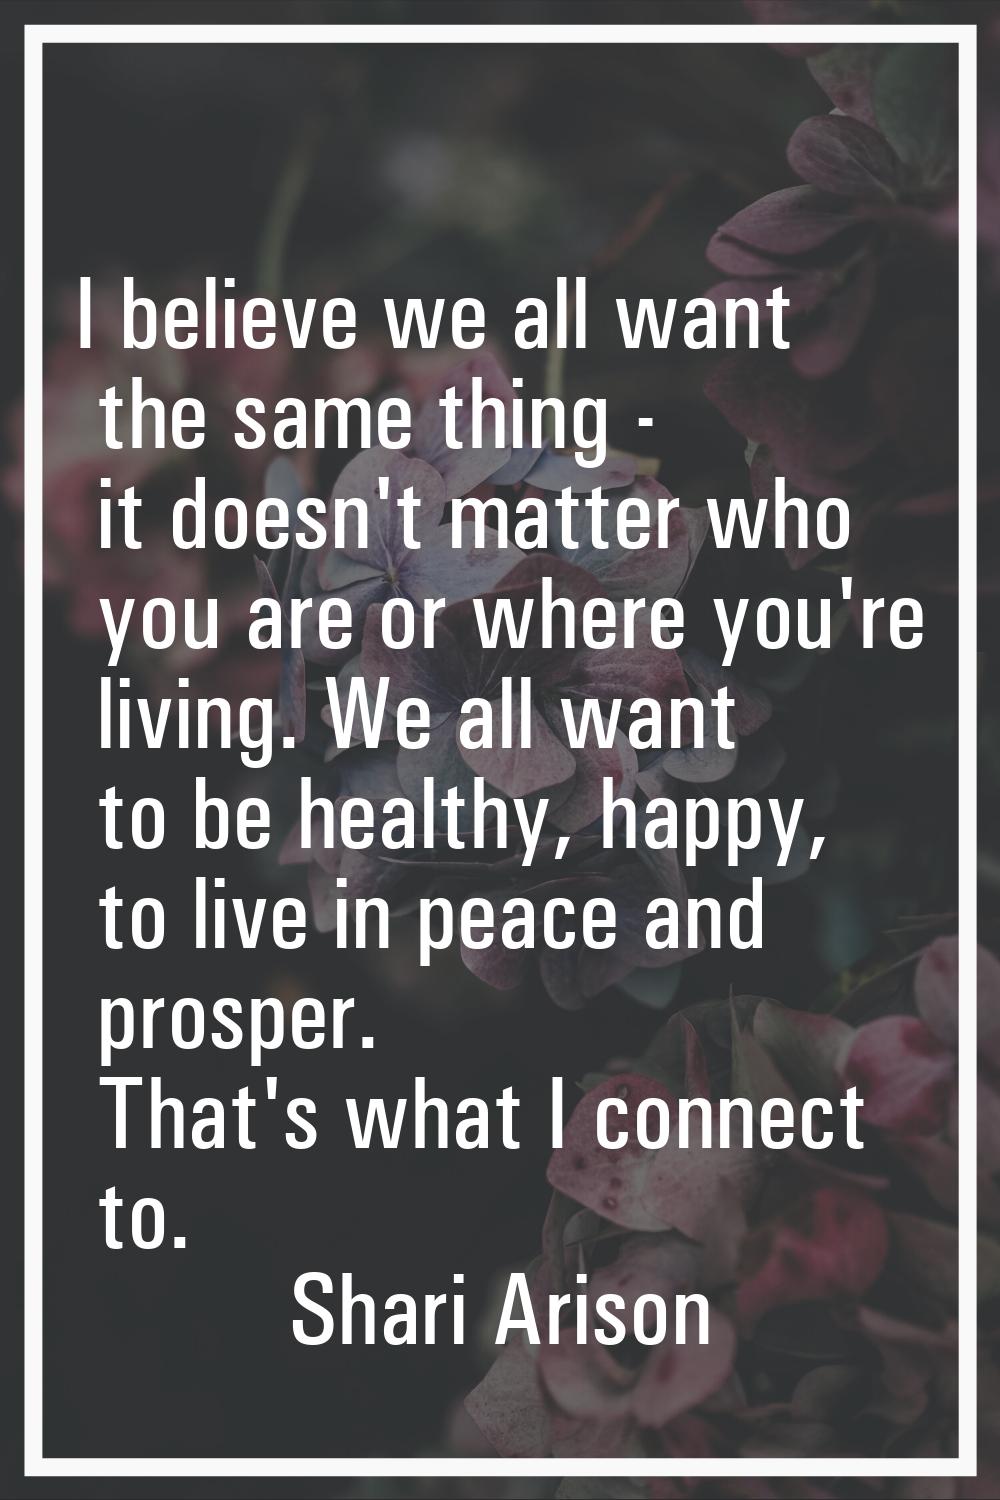 I believe we all want the same thing - it doesn't matter who you are or where you're living. We all